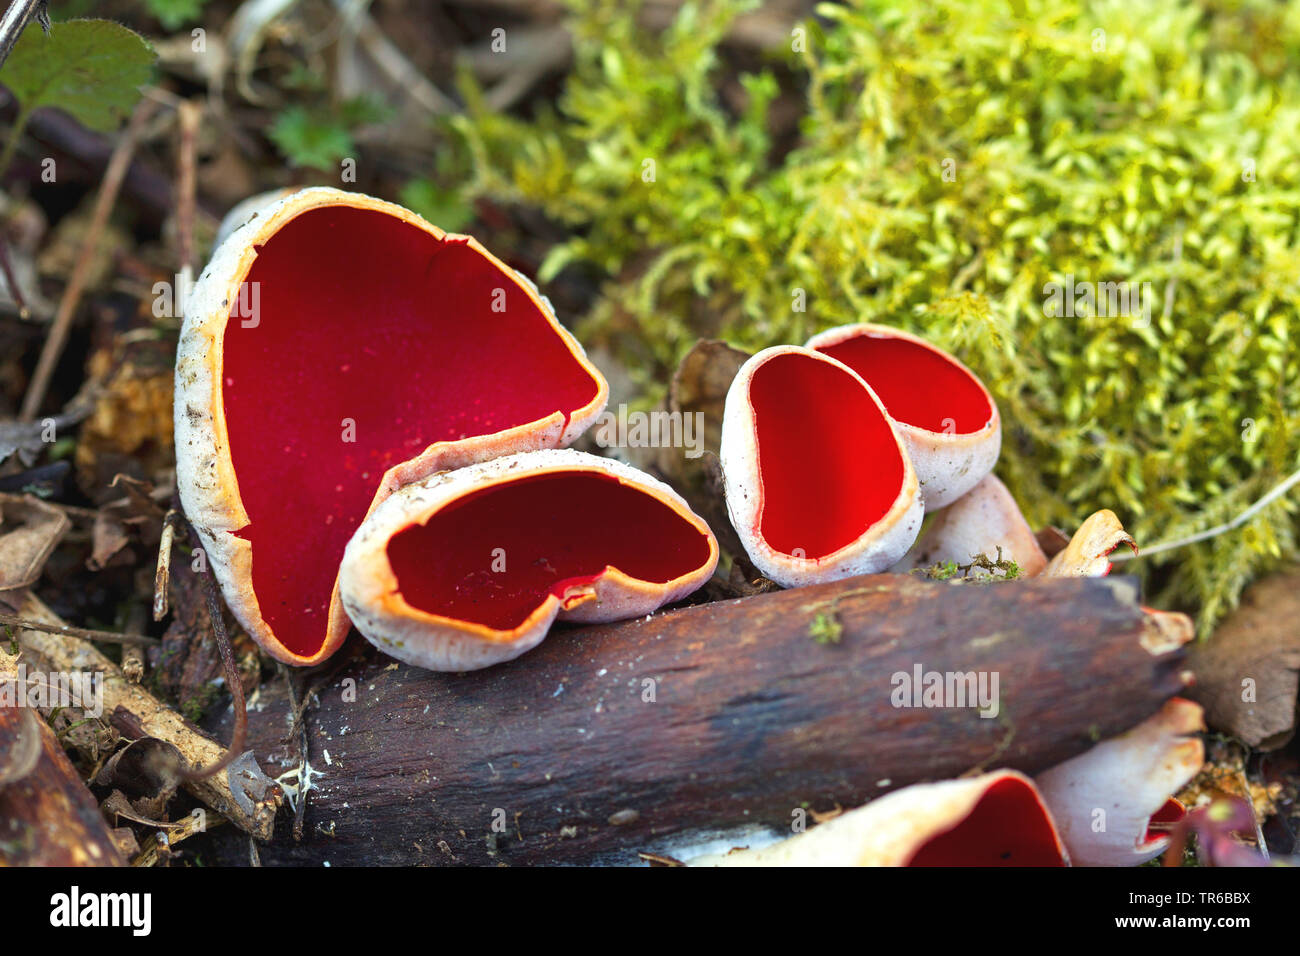 scarlet elf cup, scarlet elf cap, the scarlet cup (Sarcoscypha coccinea), on a branch, Germany, Baden-Wuerttemberg Stock Photo